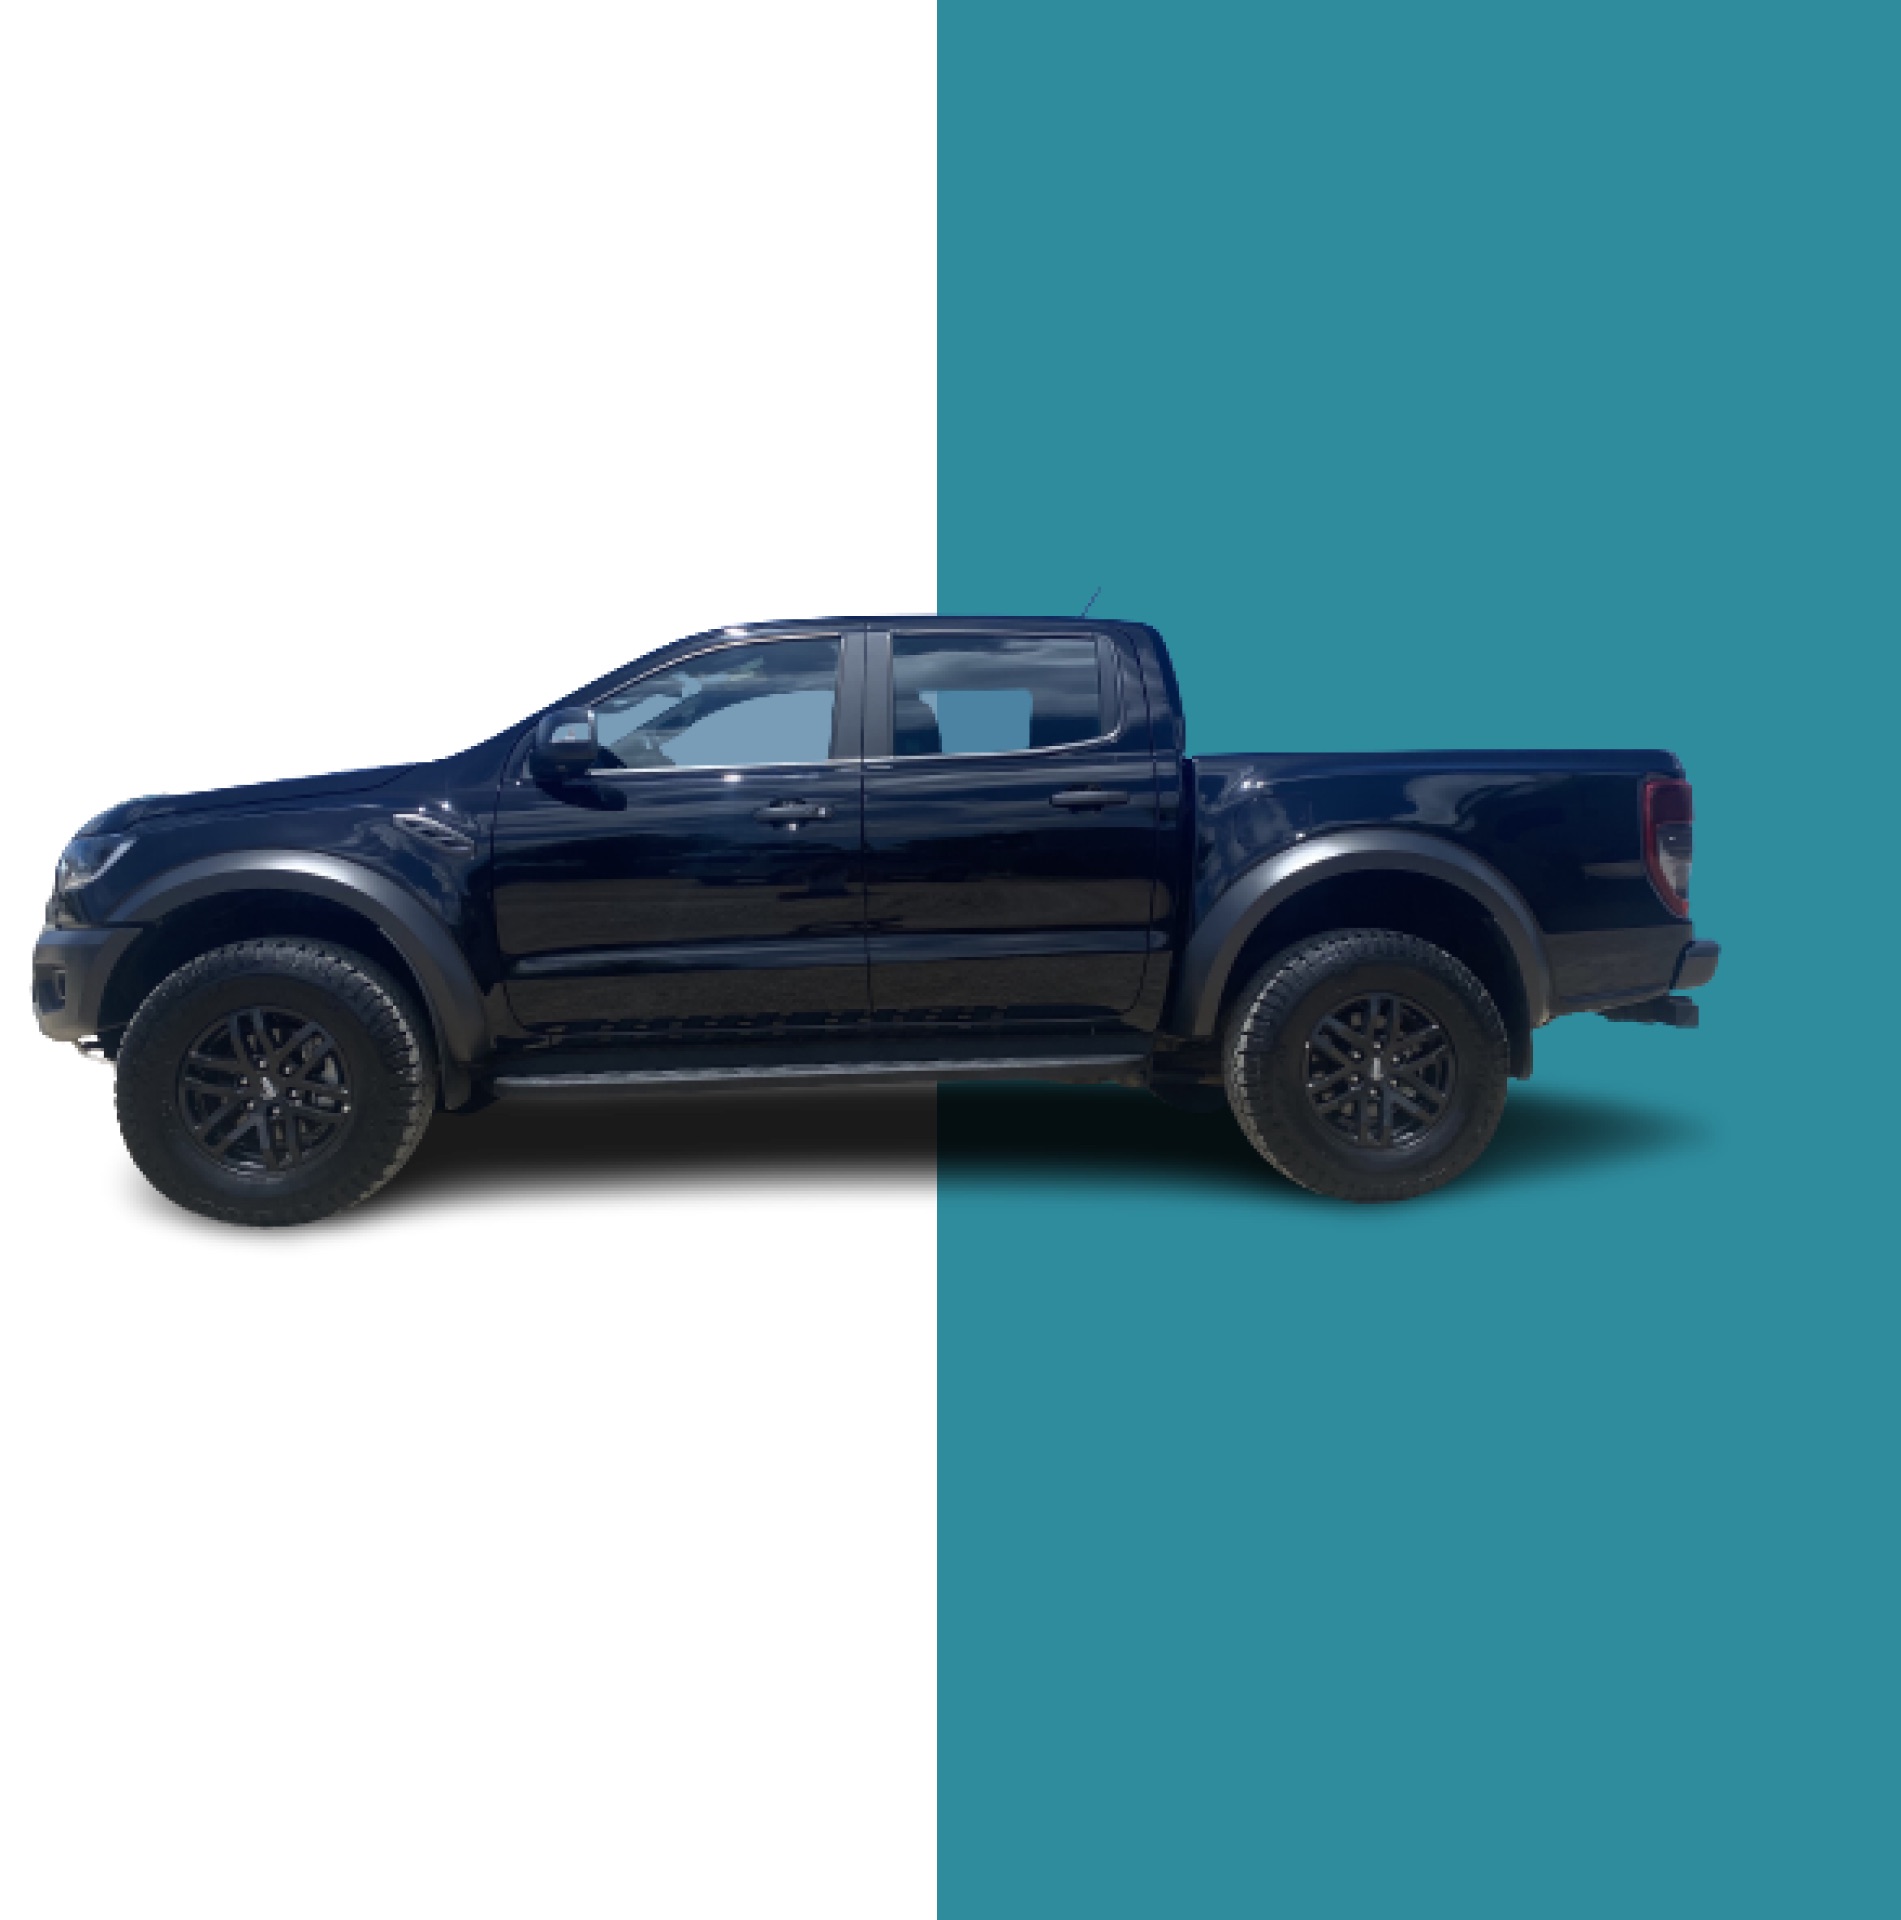 Stunning Ford Raptor Pickup showcased against a dynamic backdrop.